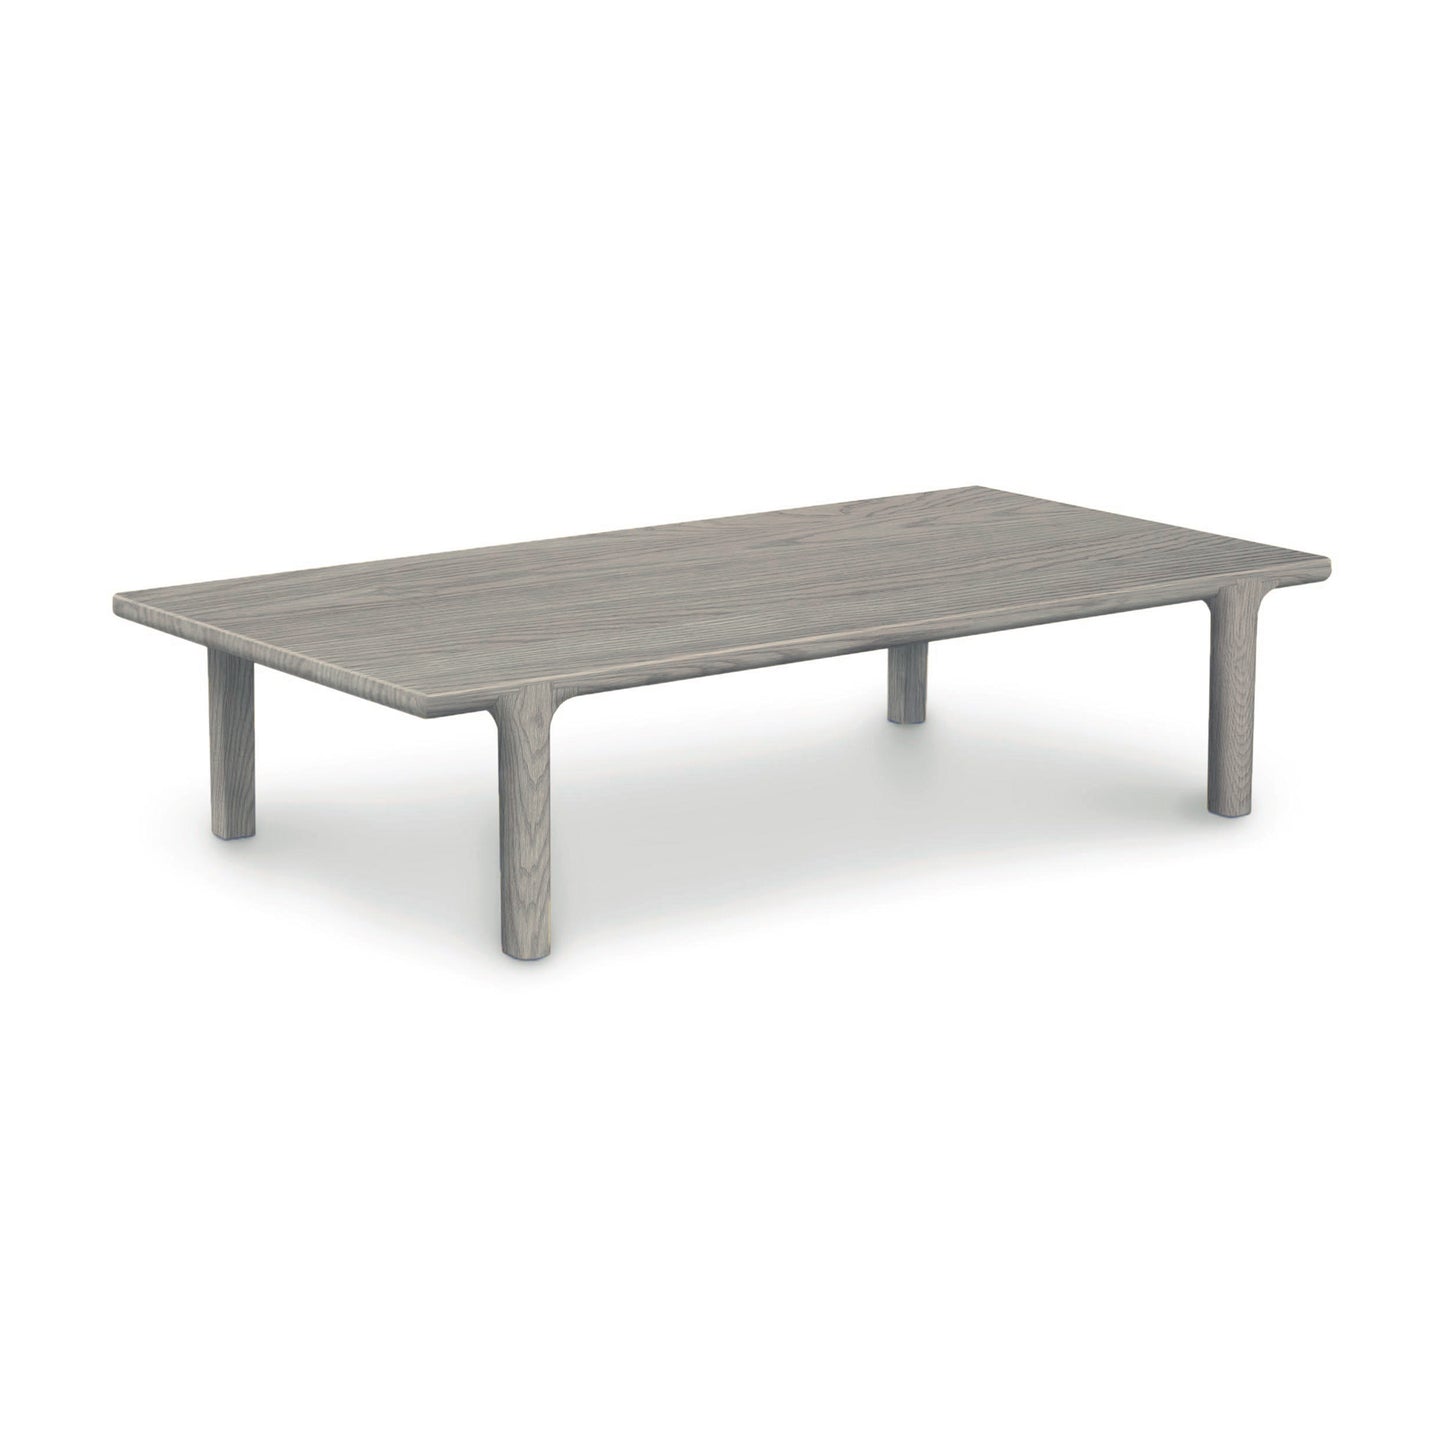 A contemporary design featuring a Copeland Furniture Sierra Rectangular Coffee Table, made of grey wooden material, placed on a white background.